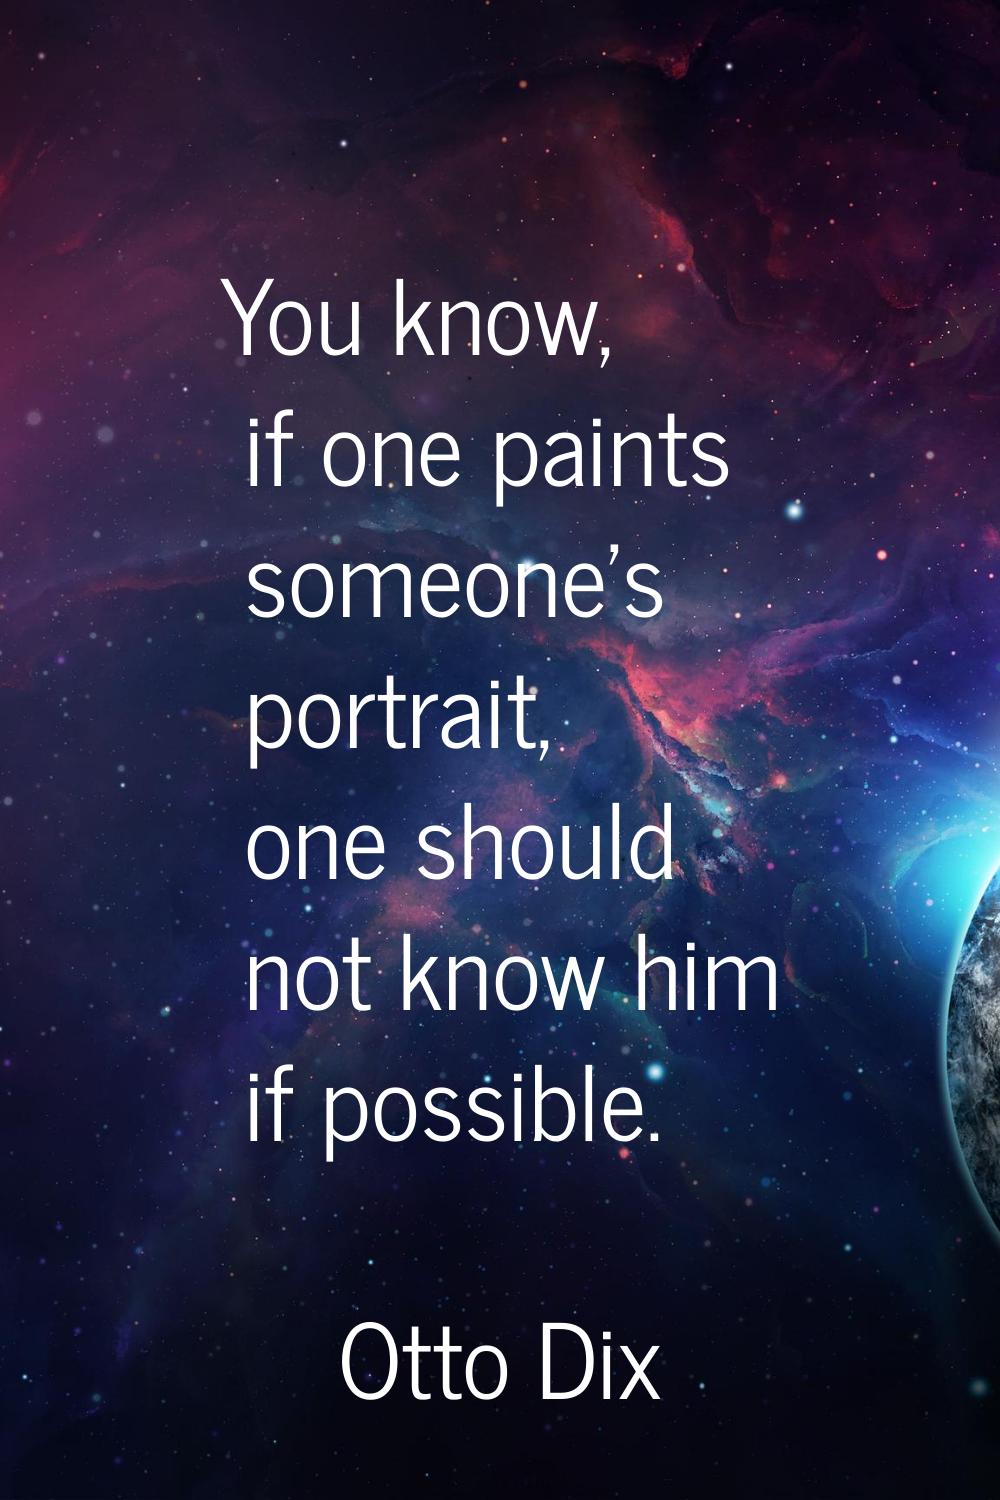 You know, if one paints someone's portrait, one should not know him if possible.